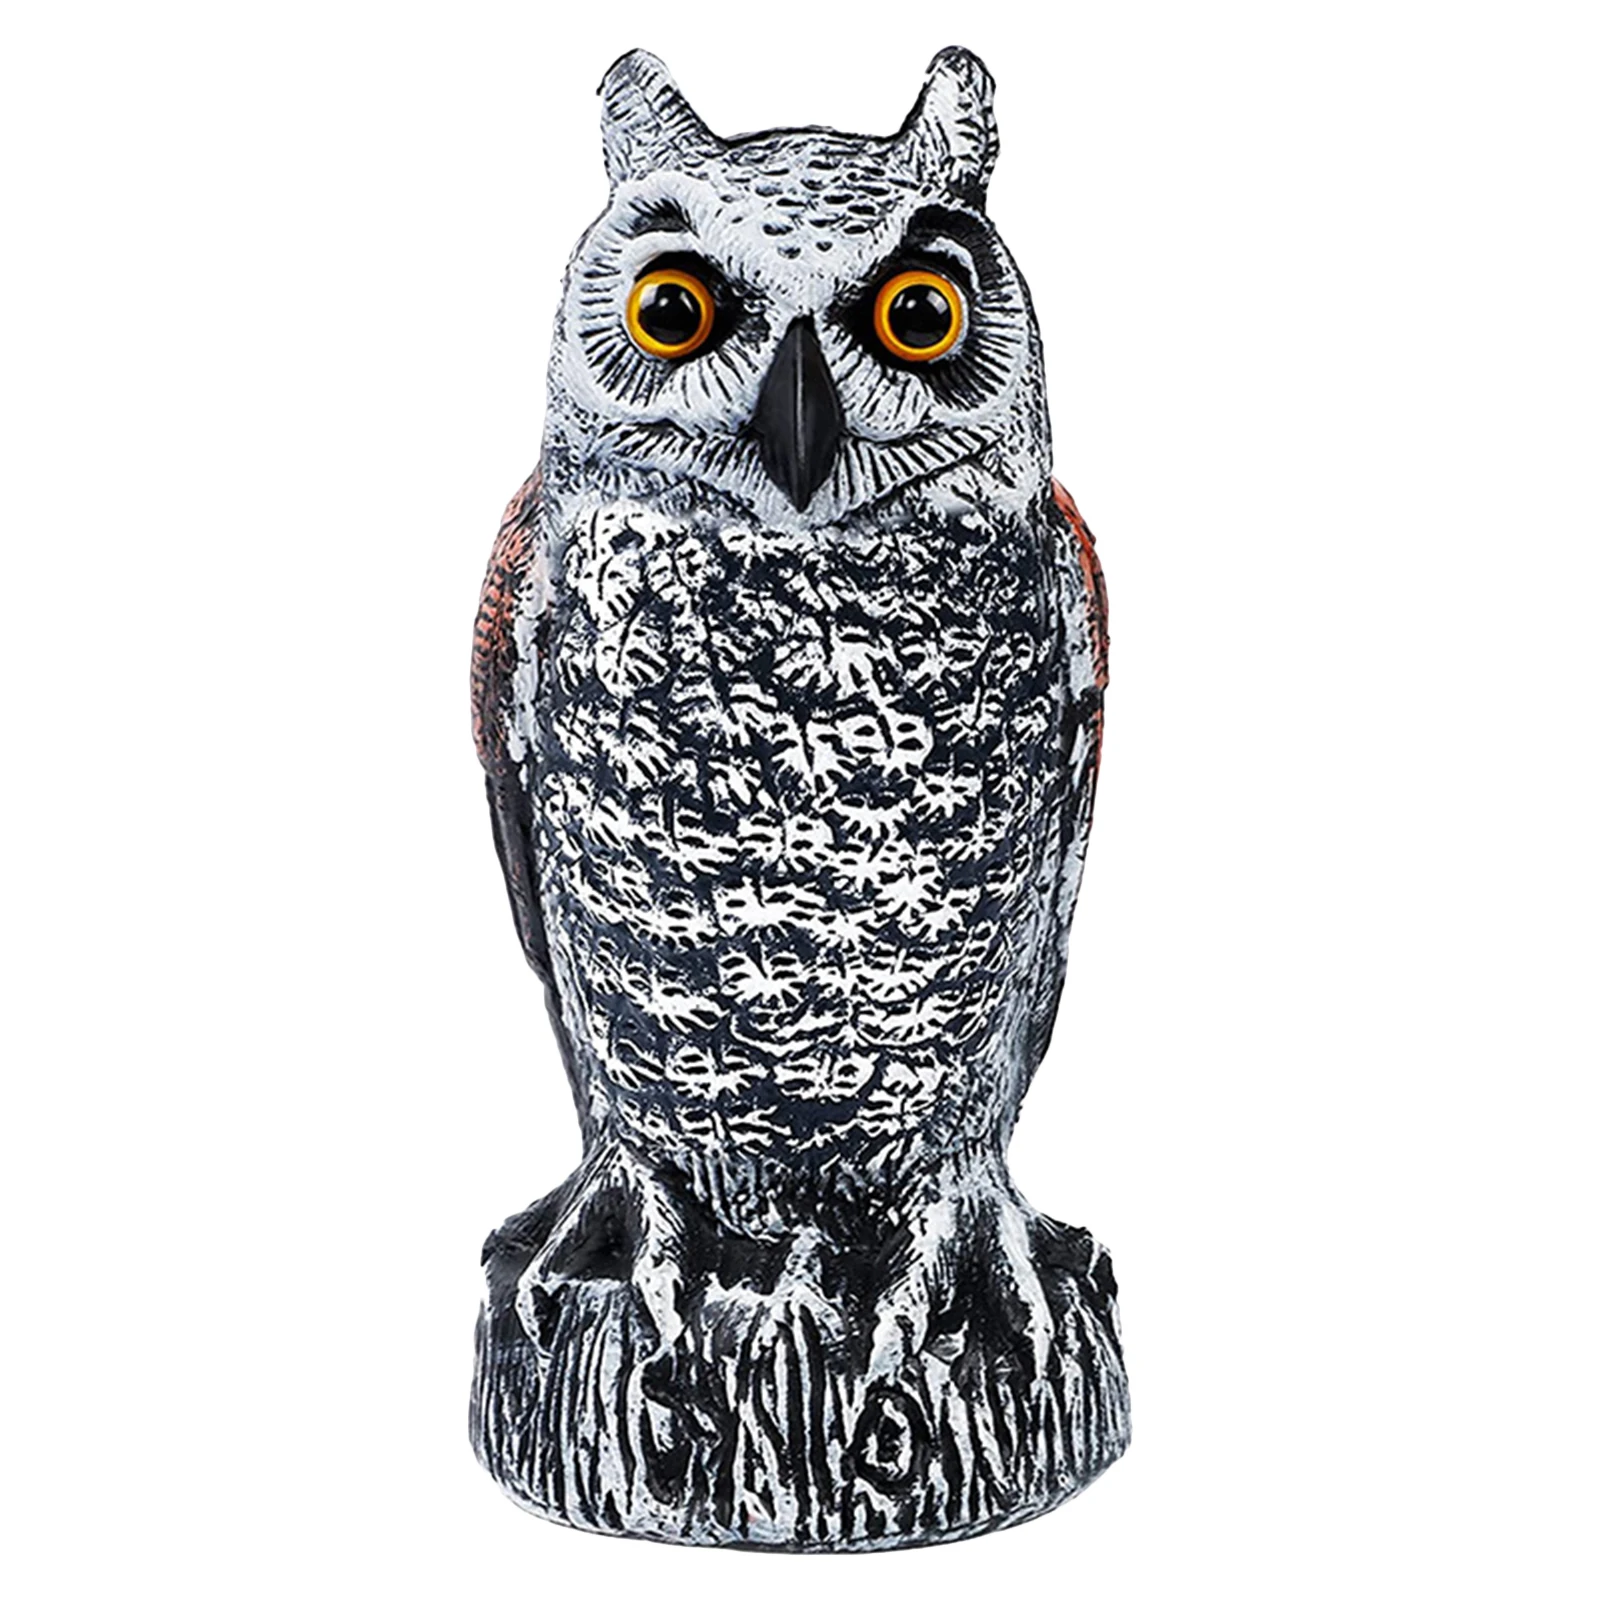 

Owl Decoys to Scare Birds Away Natural Enemy Bird Deterrents Owl Statues with Light and Sound for Yard Garden Patio Outdoor